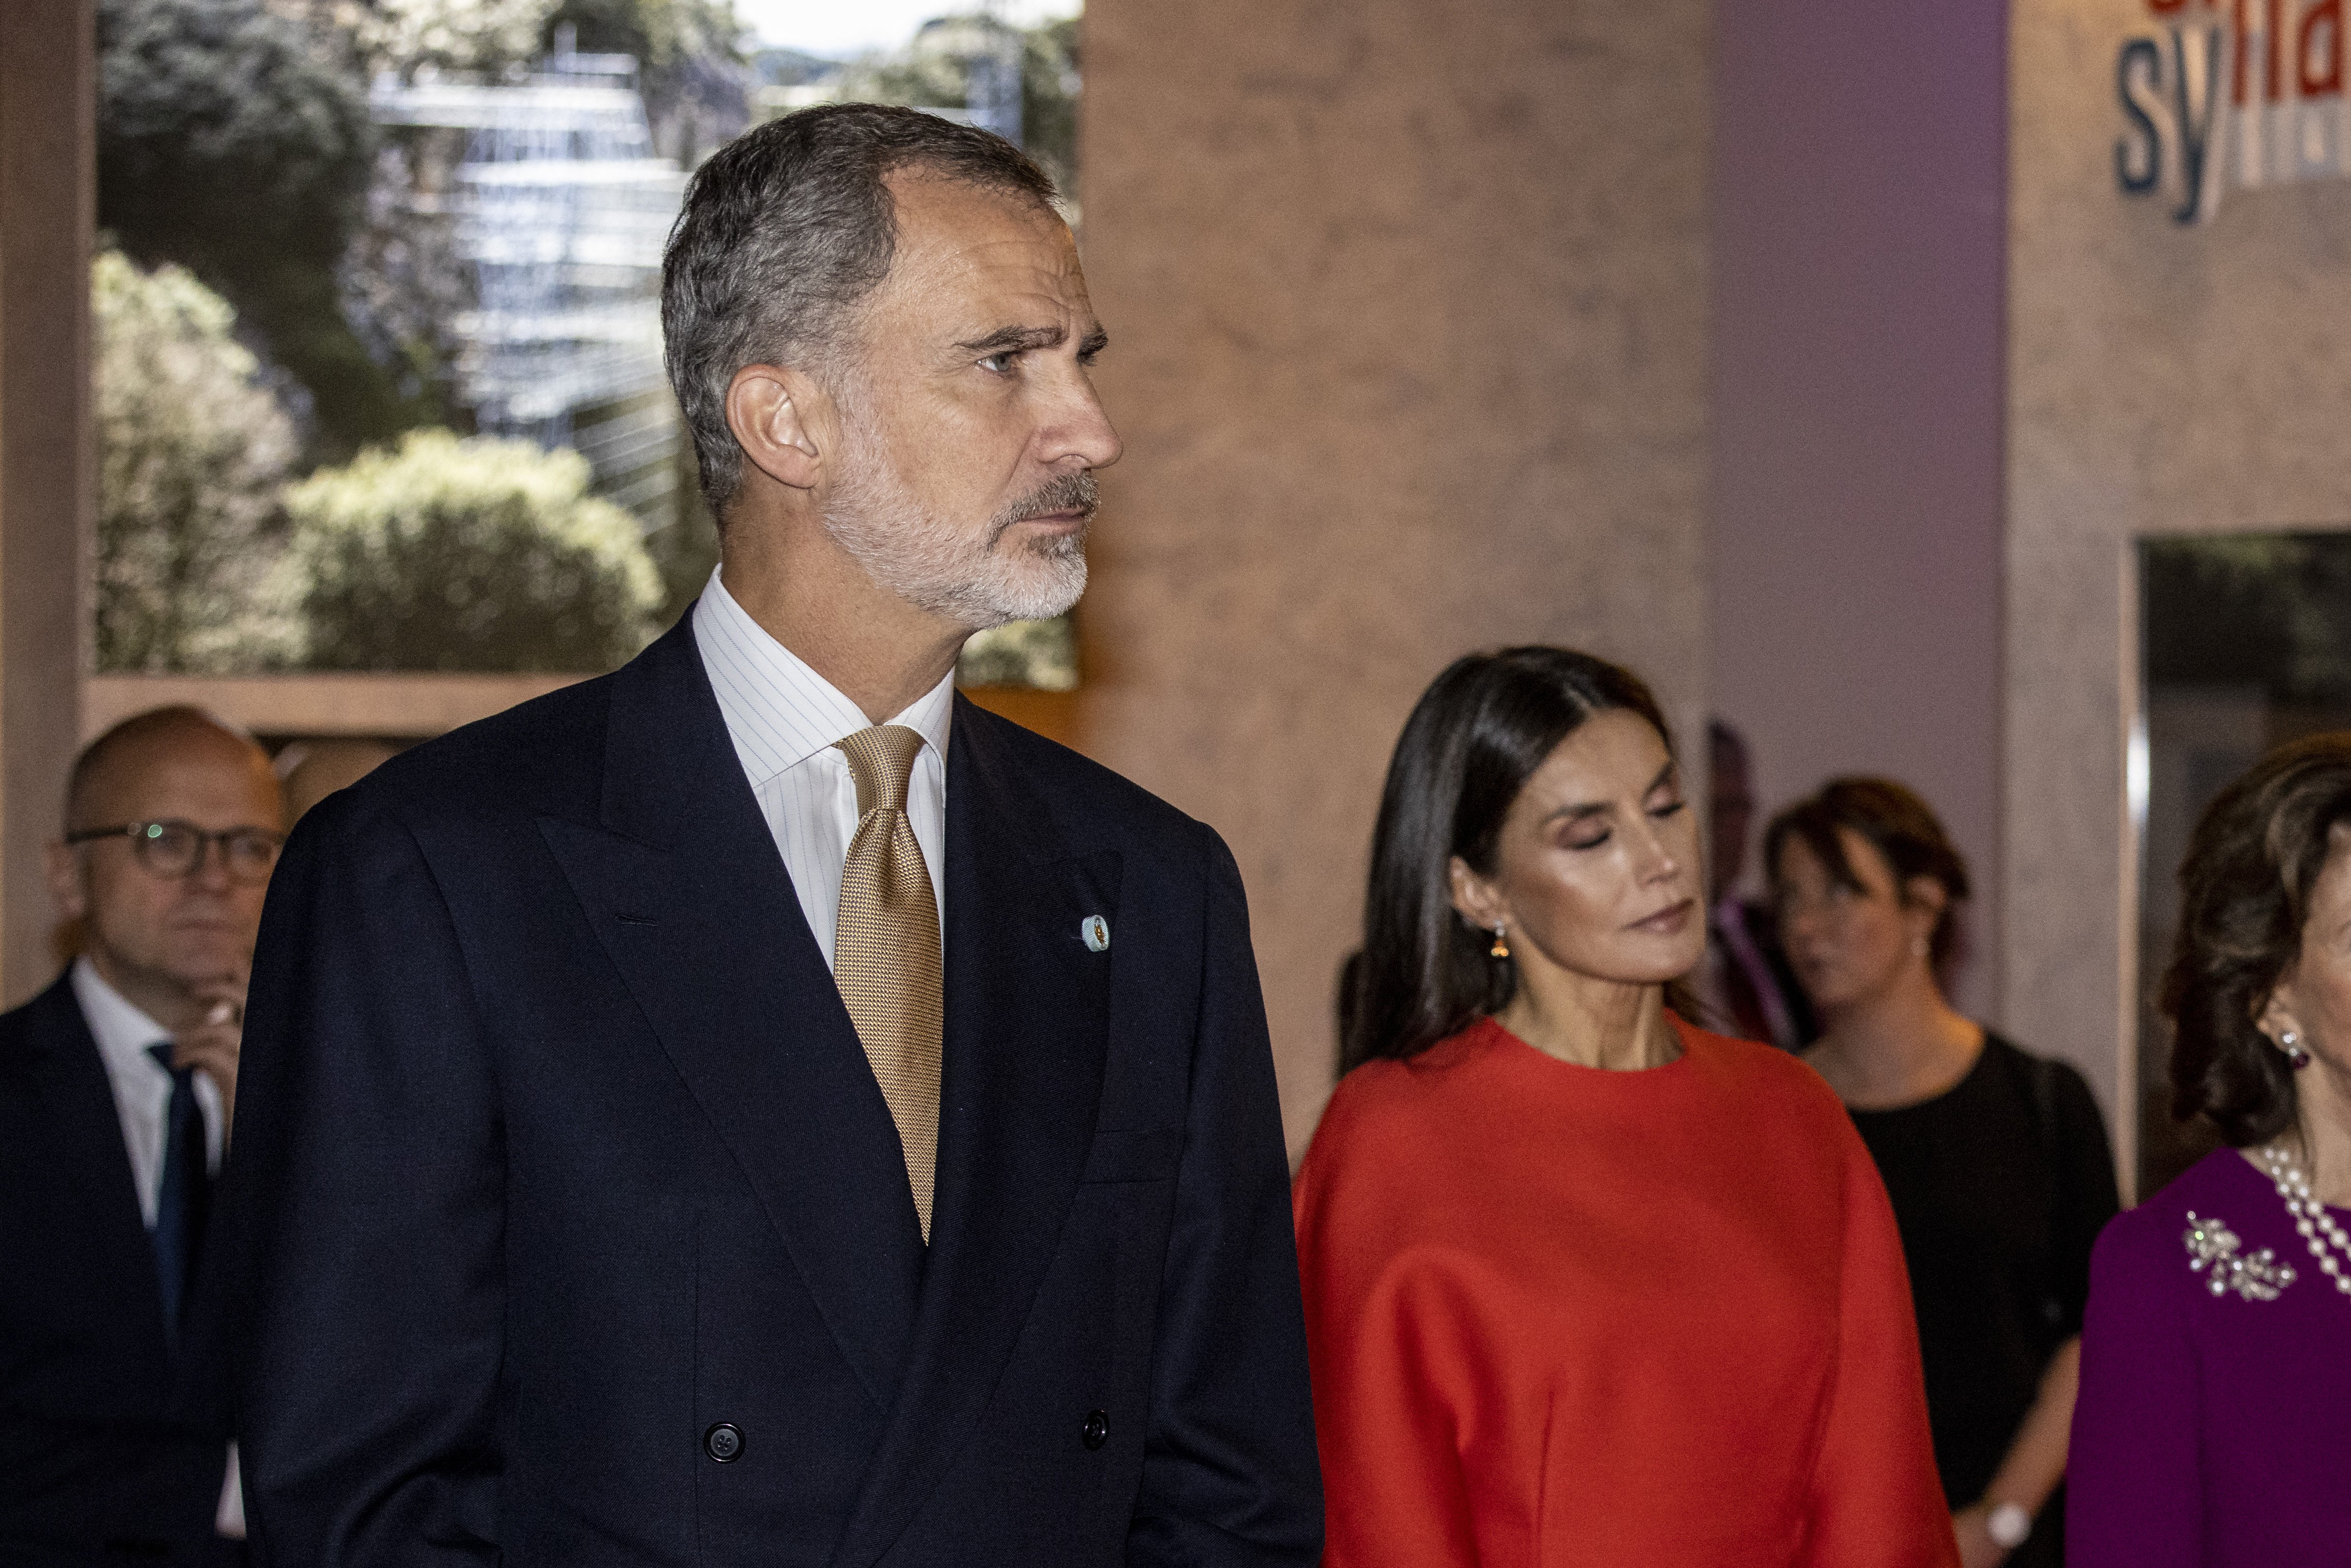 King Felipe VI and Queen Letizia of Spain visiting the Nobel Museum and the special exhibition on Santiago Ramon y Cajal on November 24, 2021 in Stockholm, Sweden. / Source: Getty Images